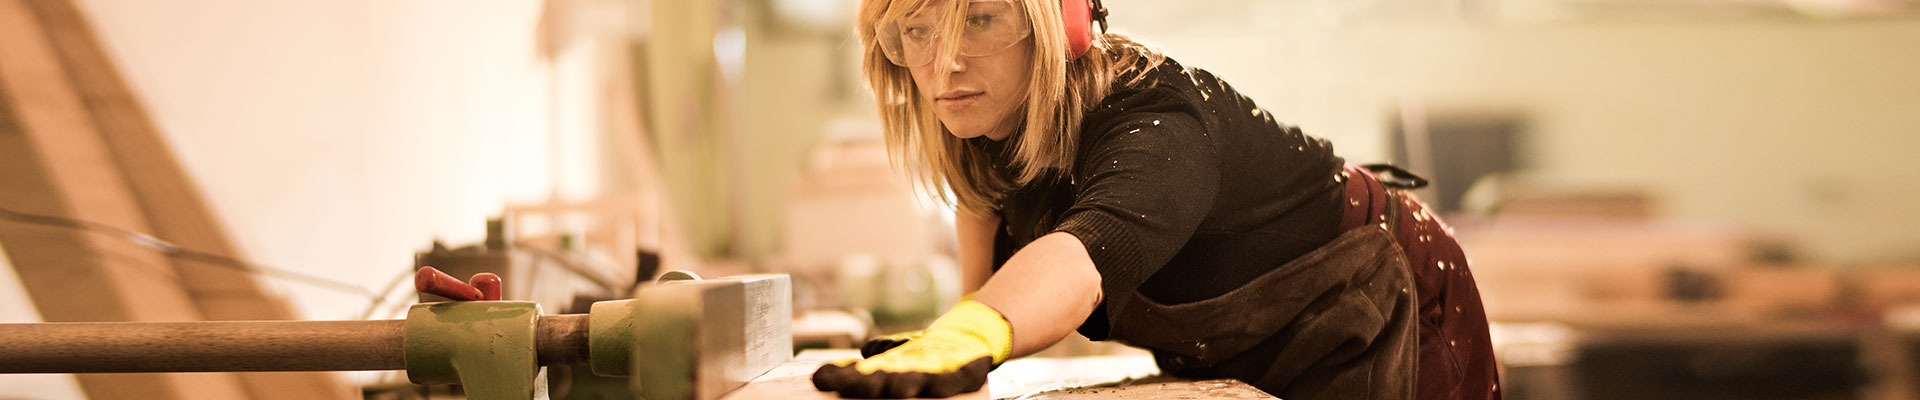 A woman wearing protective goggles and protective gloves works at a workbench.